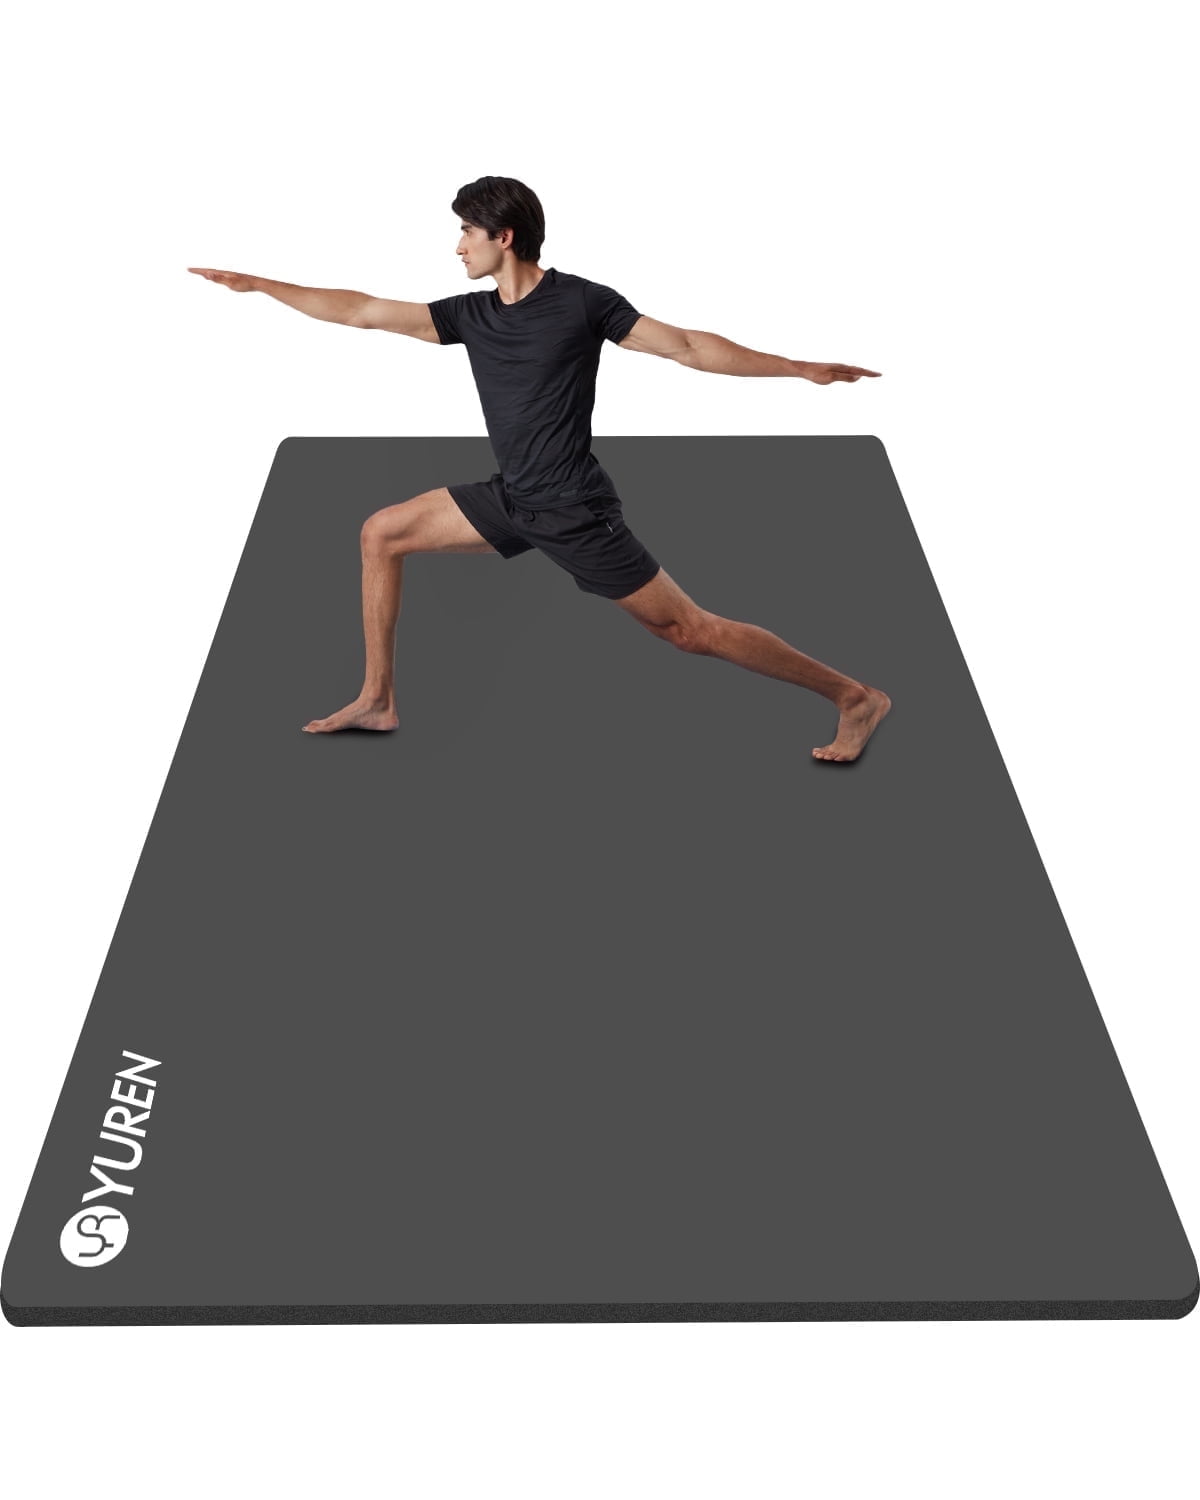 BalanceFrom All-Purpose 1/2-Inch High Density Foam Exercise Yoga